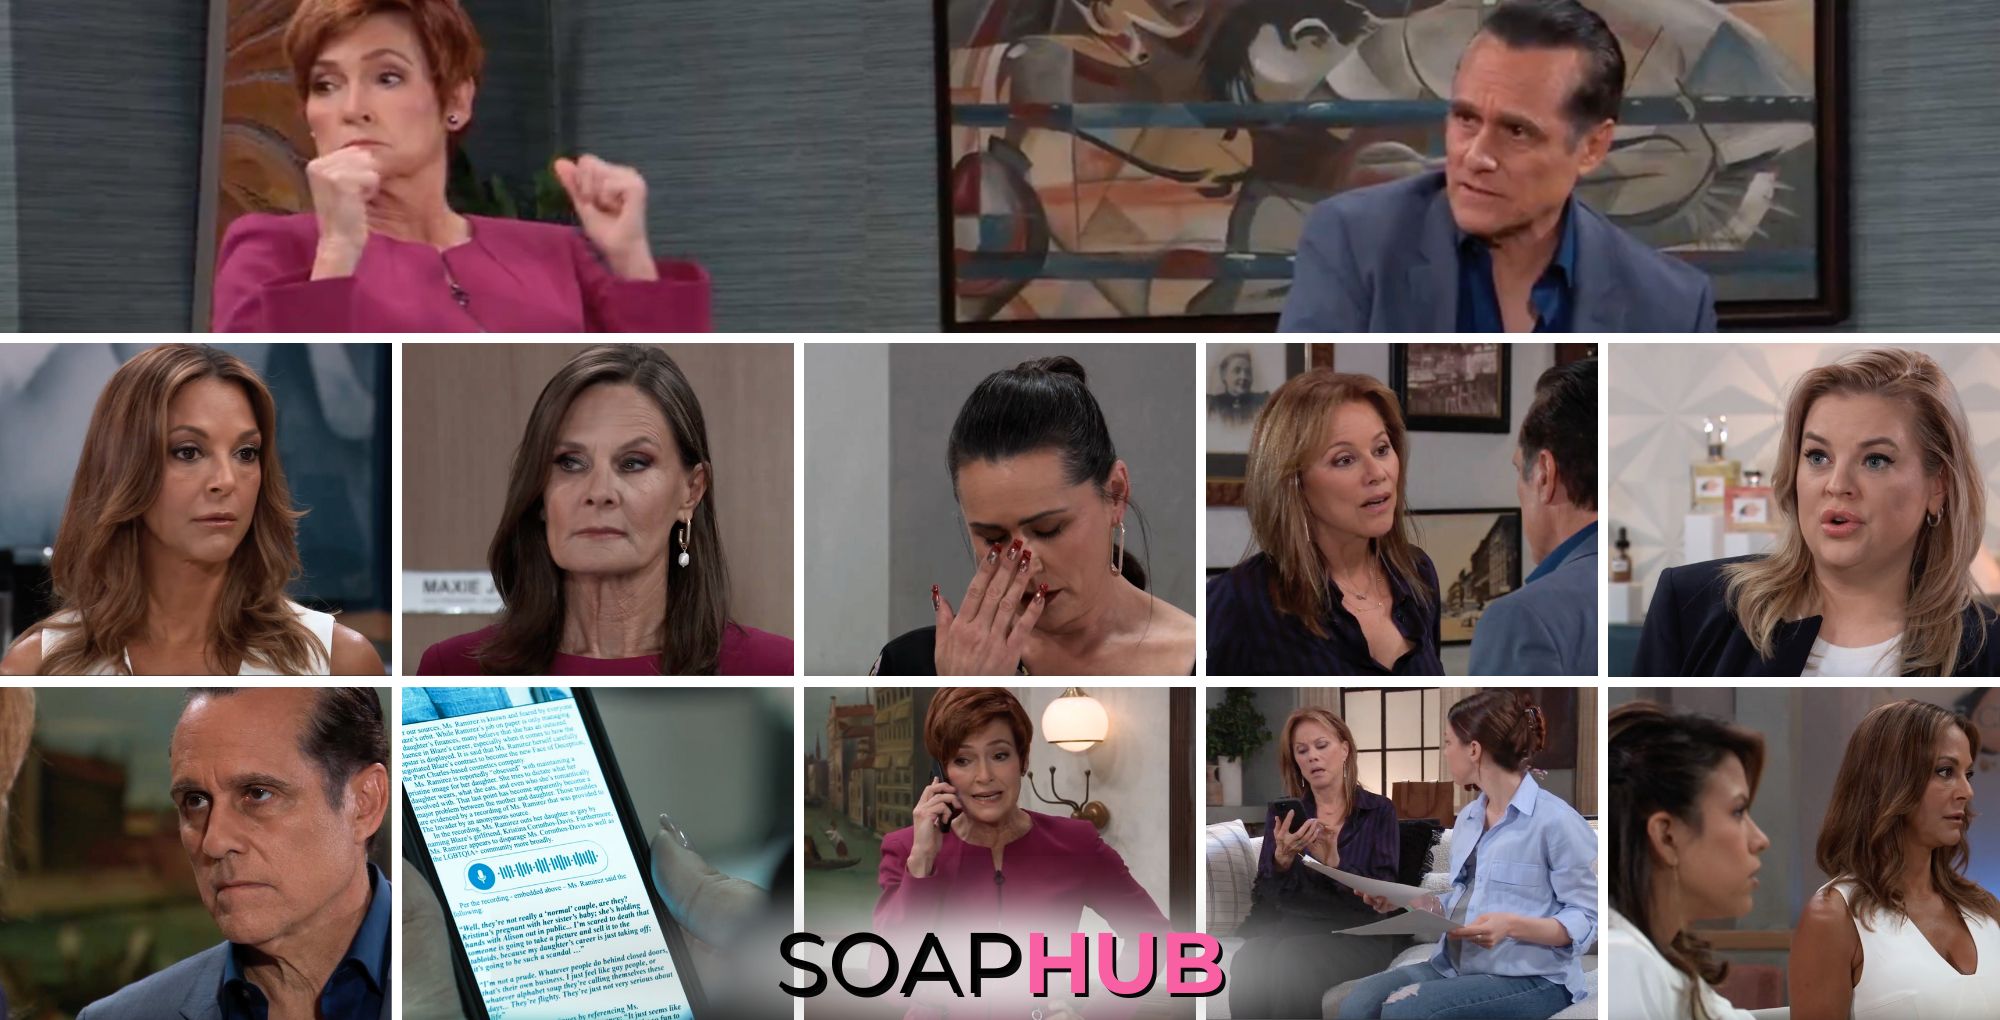 General Hospital spoilers weekly video preview collage for the week of July 1 with the soap hub logo near the bottom of the graphic